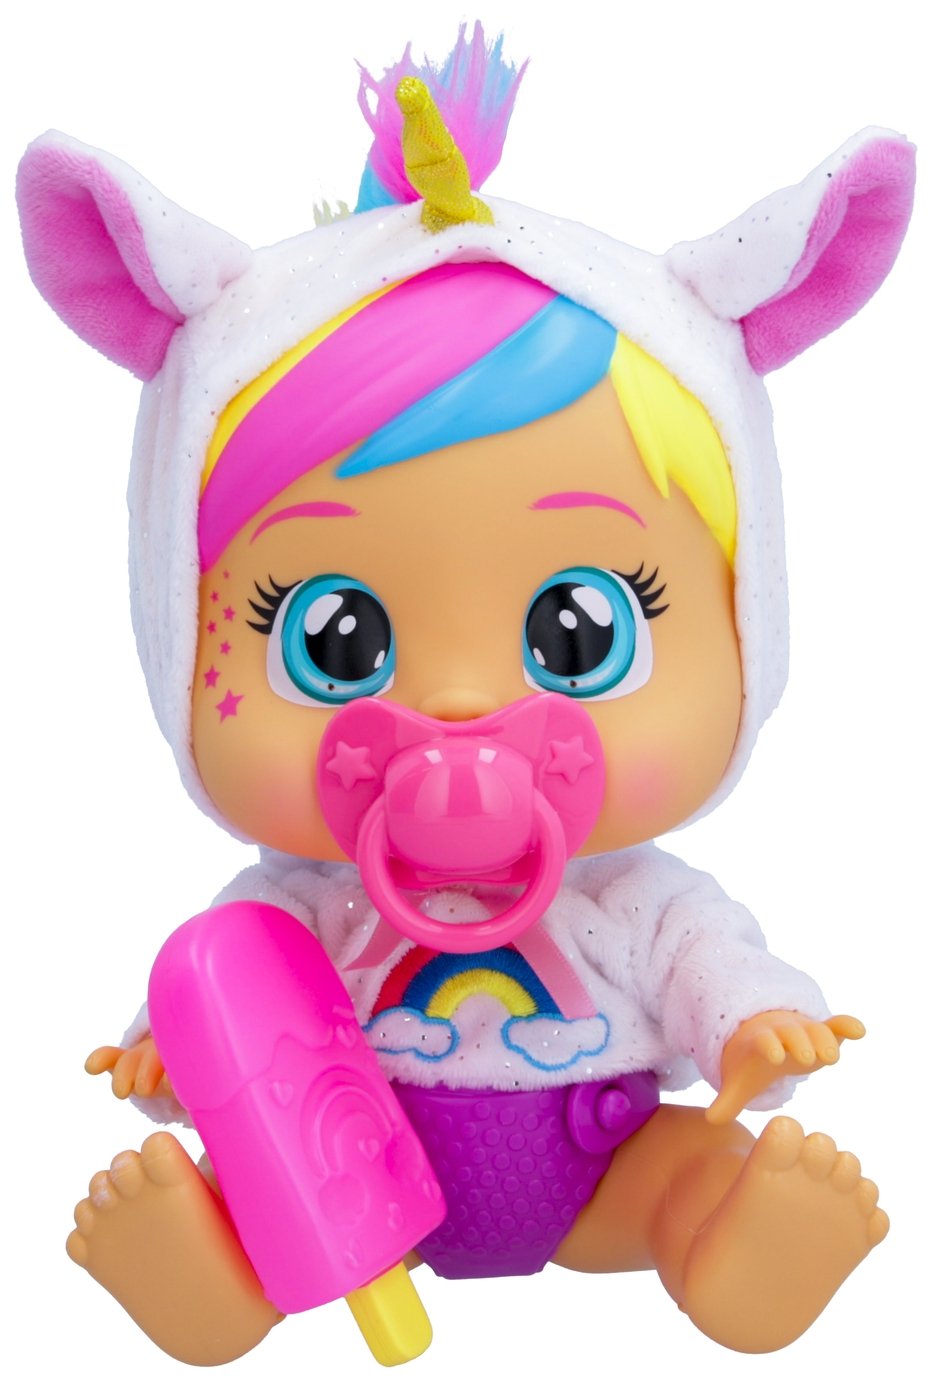 Cry Babies Loving Care Dreamy Doll - 10inch/26cm